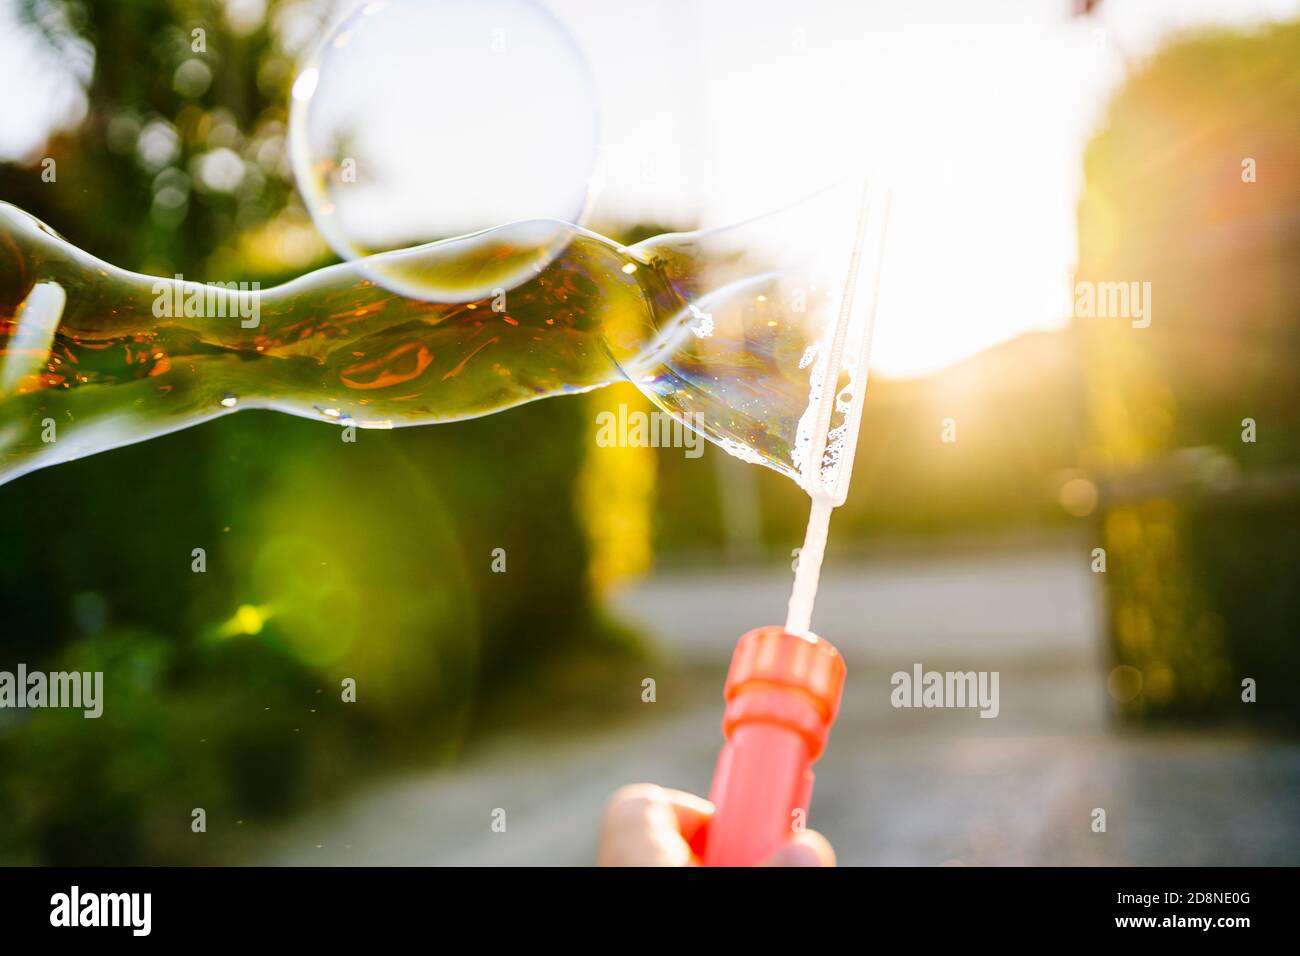 Soap Bubbles Game at sunset Stock Photo